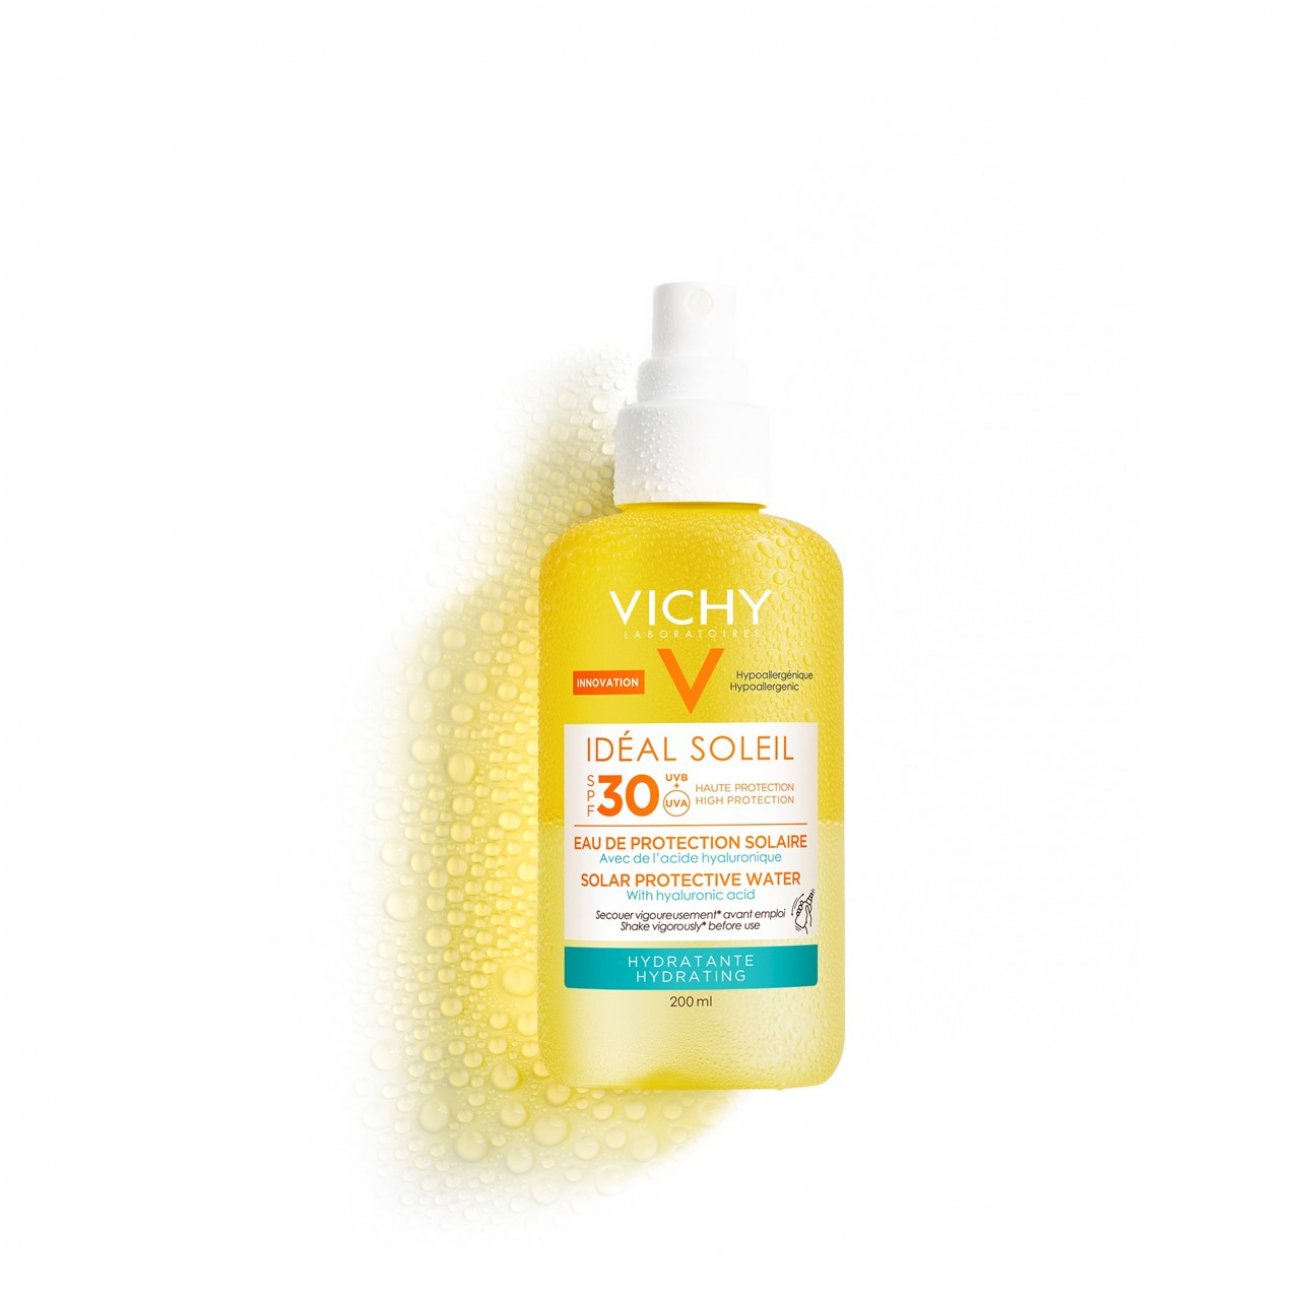 Vichy Idéal Soleil Solar Protective Water Hydrating SPF30 200ml